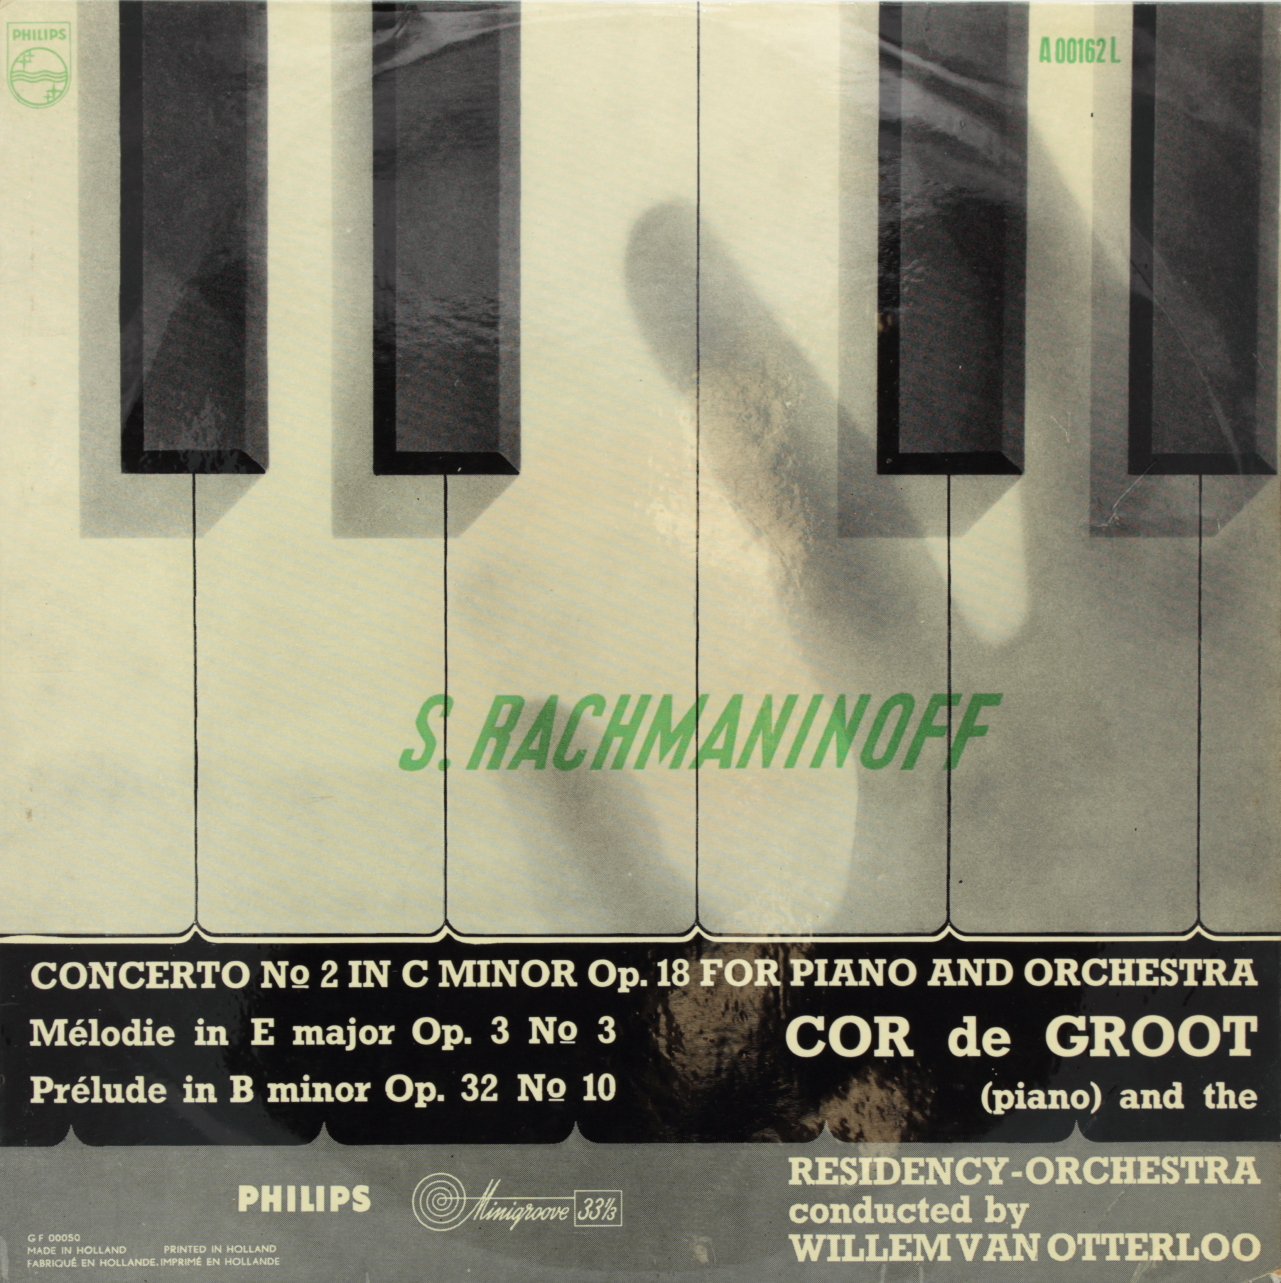 Rachmaninoff: Concerto Nº 2 in C minor op. 18 for Piano and Orchestra; Mélodie in E major Op. 3 N